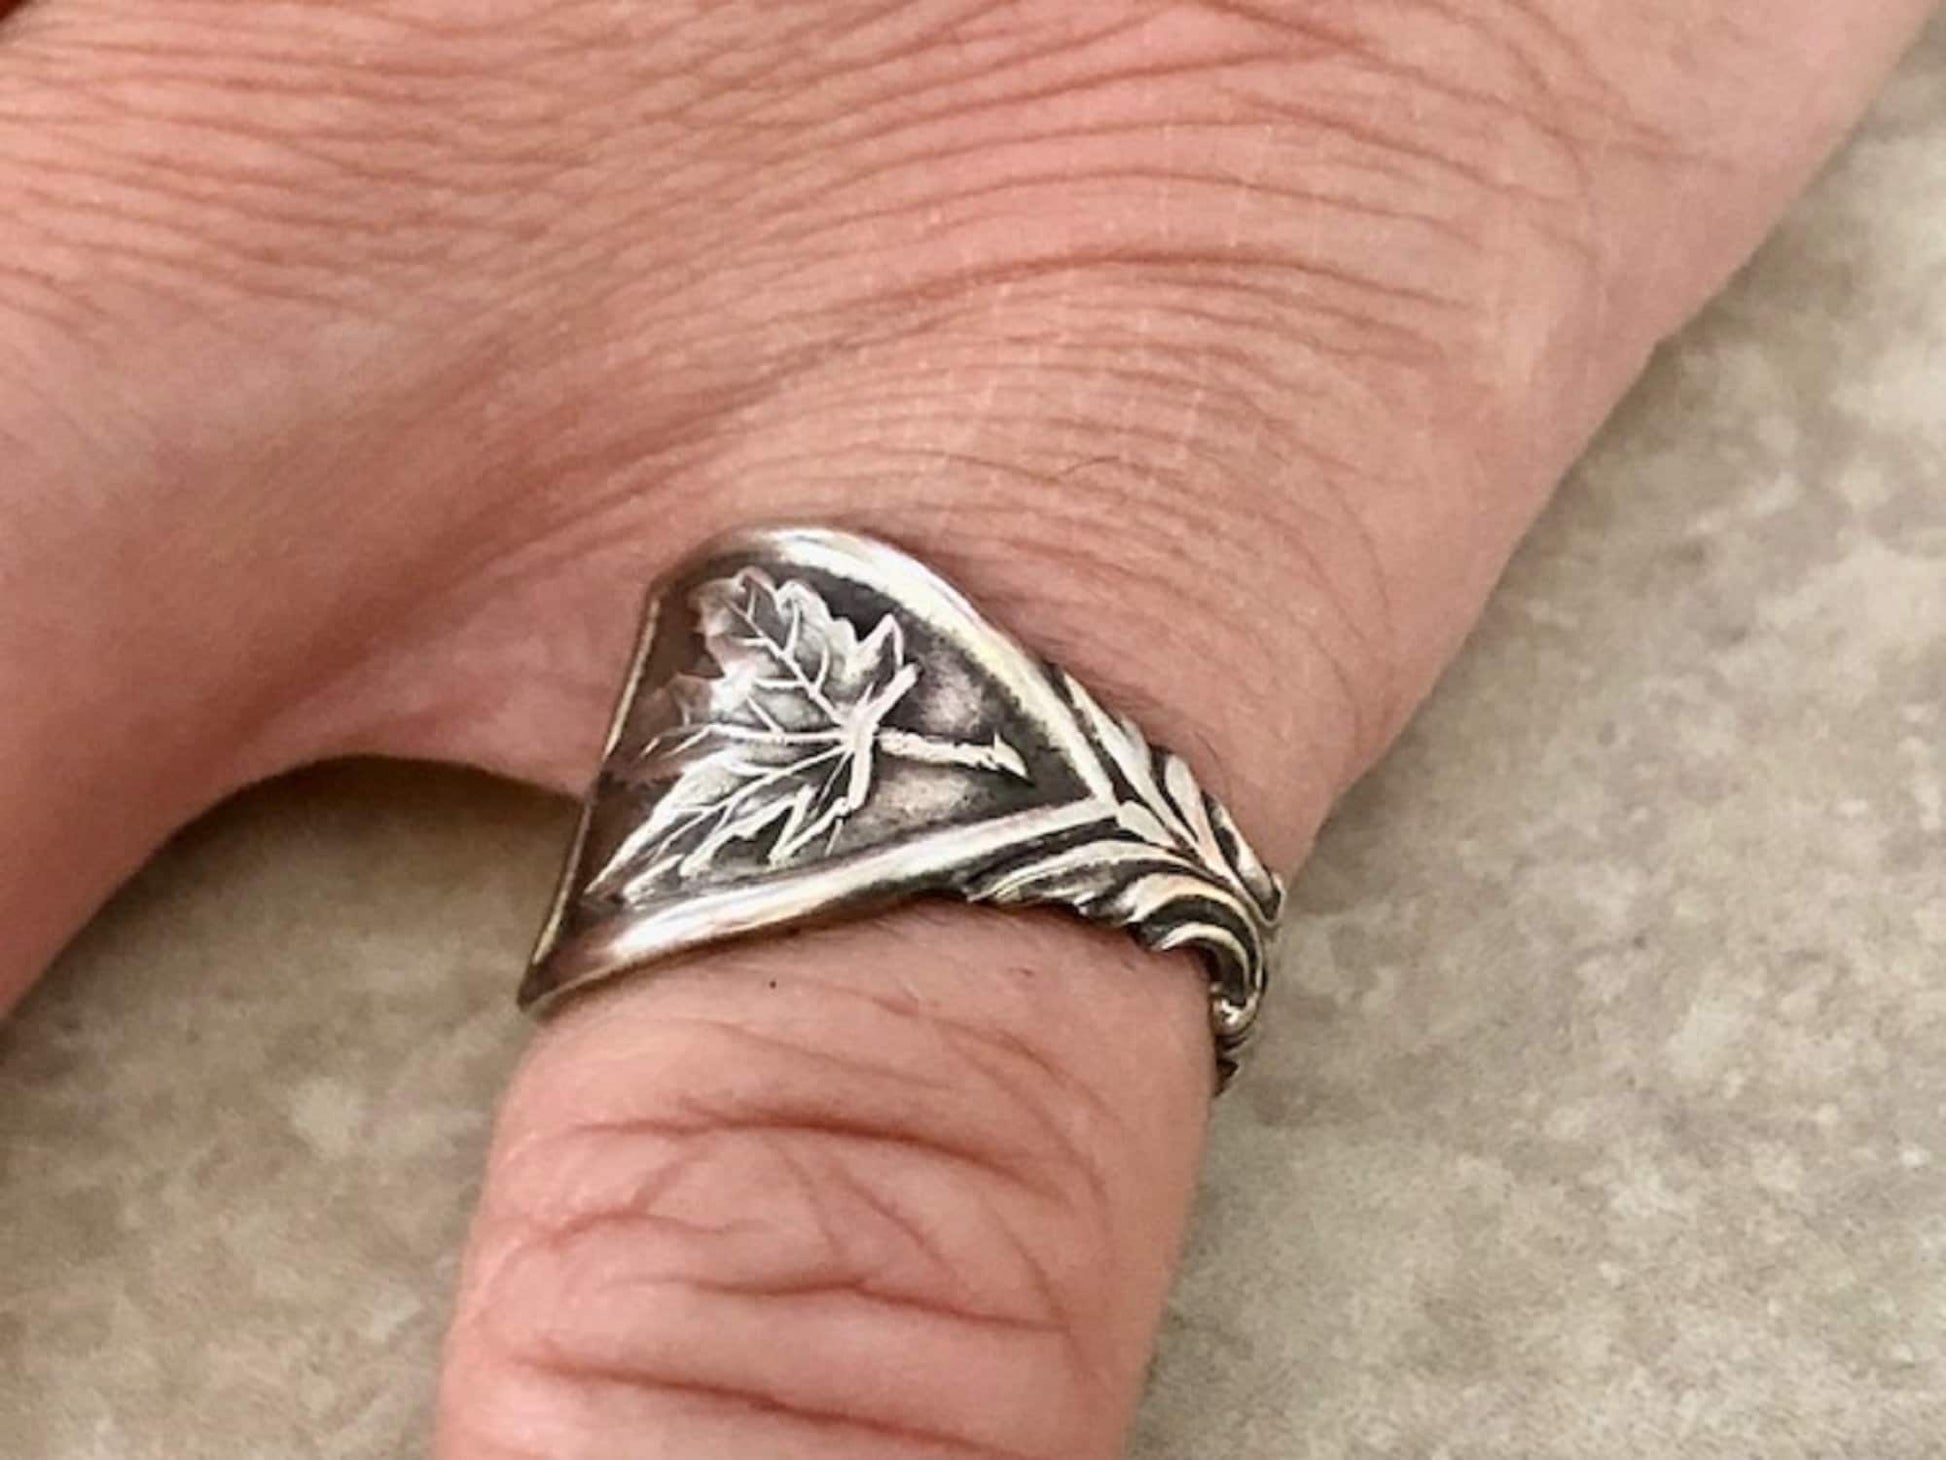 Victorian 925 Sterling Silver Maple Leaf Spoon Ring, Classic Vintage Silverware Jewelry, Wrapped Spoon, Love Balance Longevity, Handmade